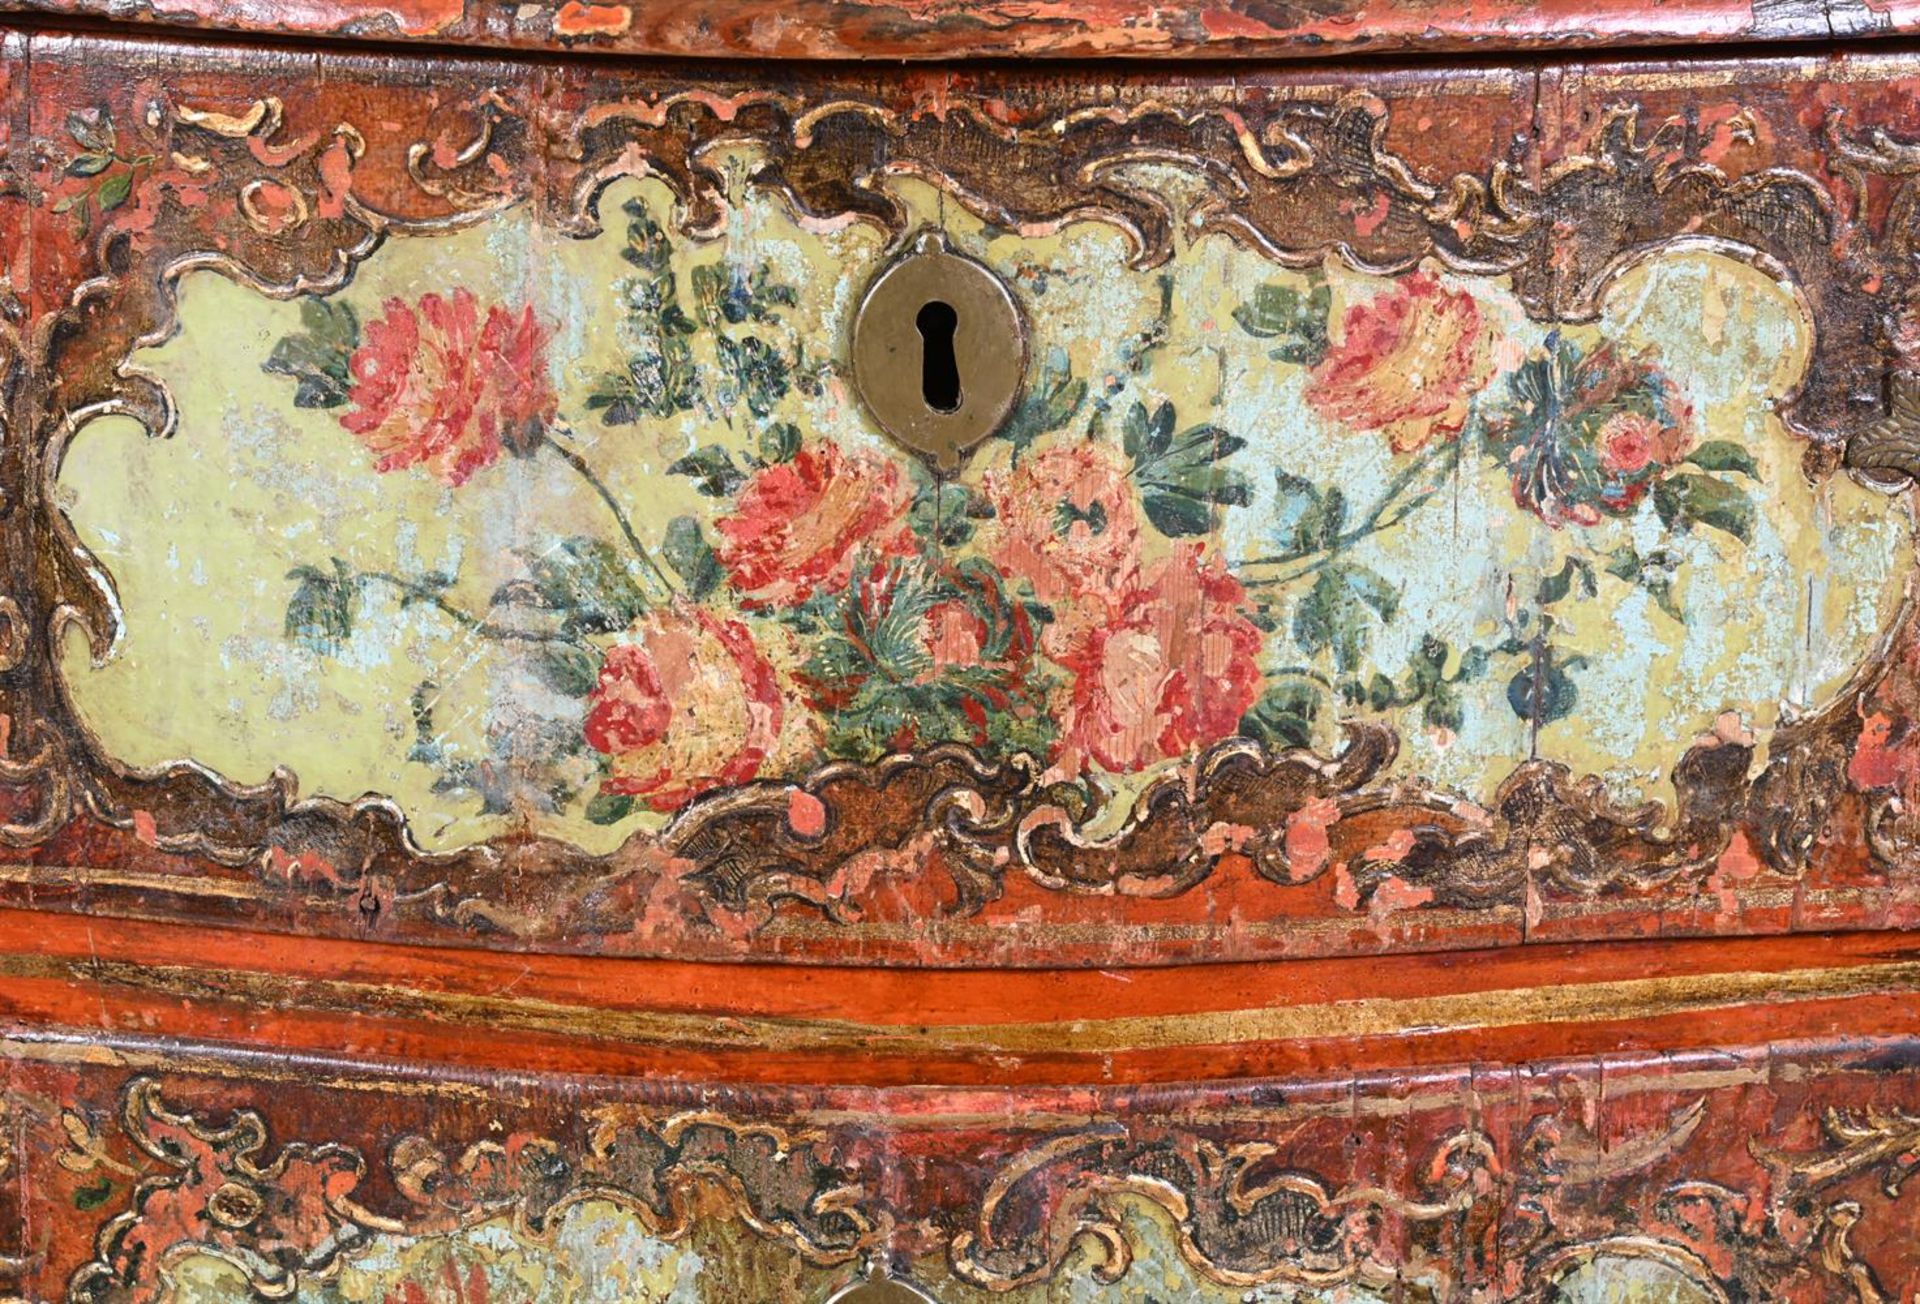 A NORTH ITALIAN POLYCHROME DECORATED SERPENTINE COMMODE MID 18TH CENTURY - Image 4 of 4